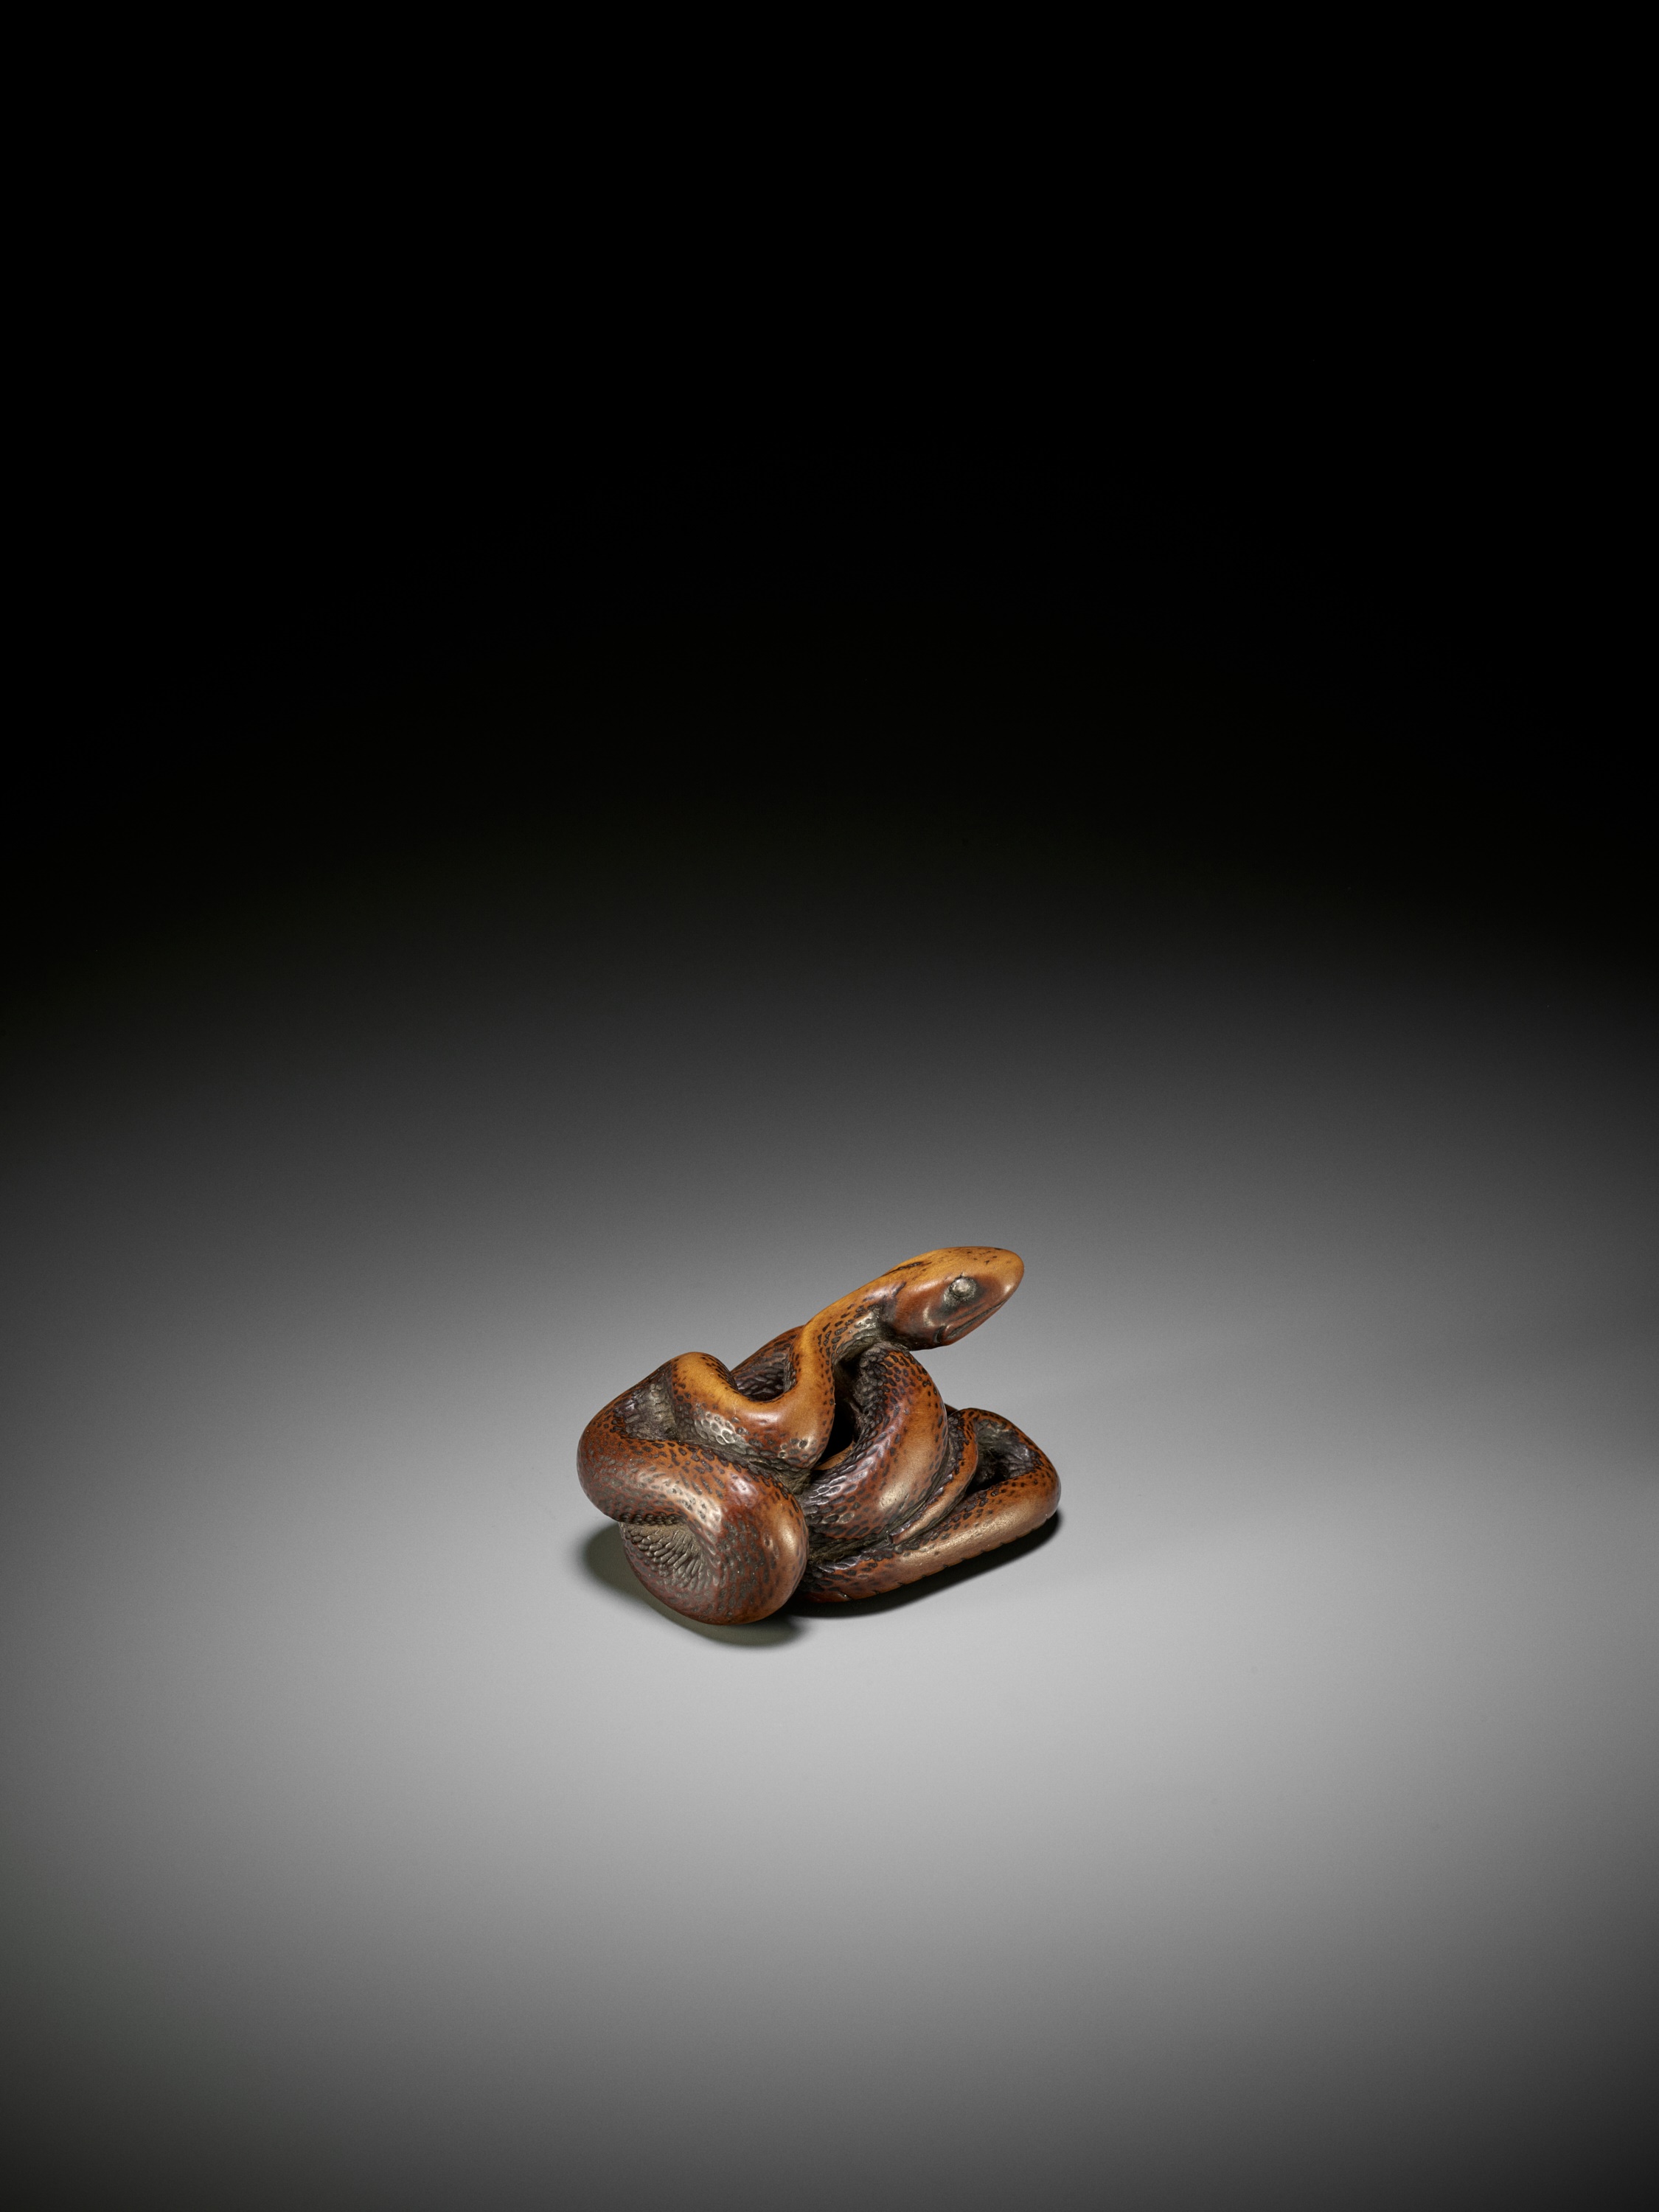 A LARGE AND POWERFUL WOOD NETSUKE OF A COILED SNAKE - Image 3 of 10